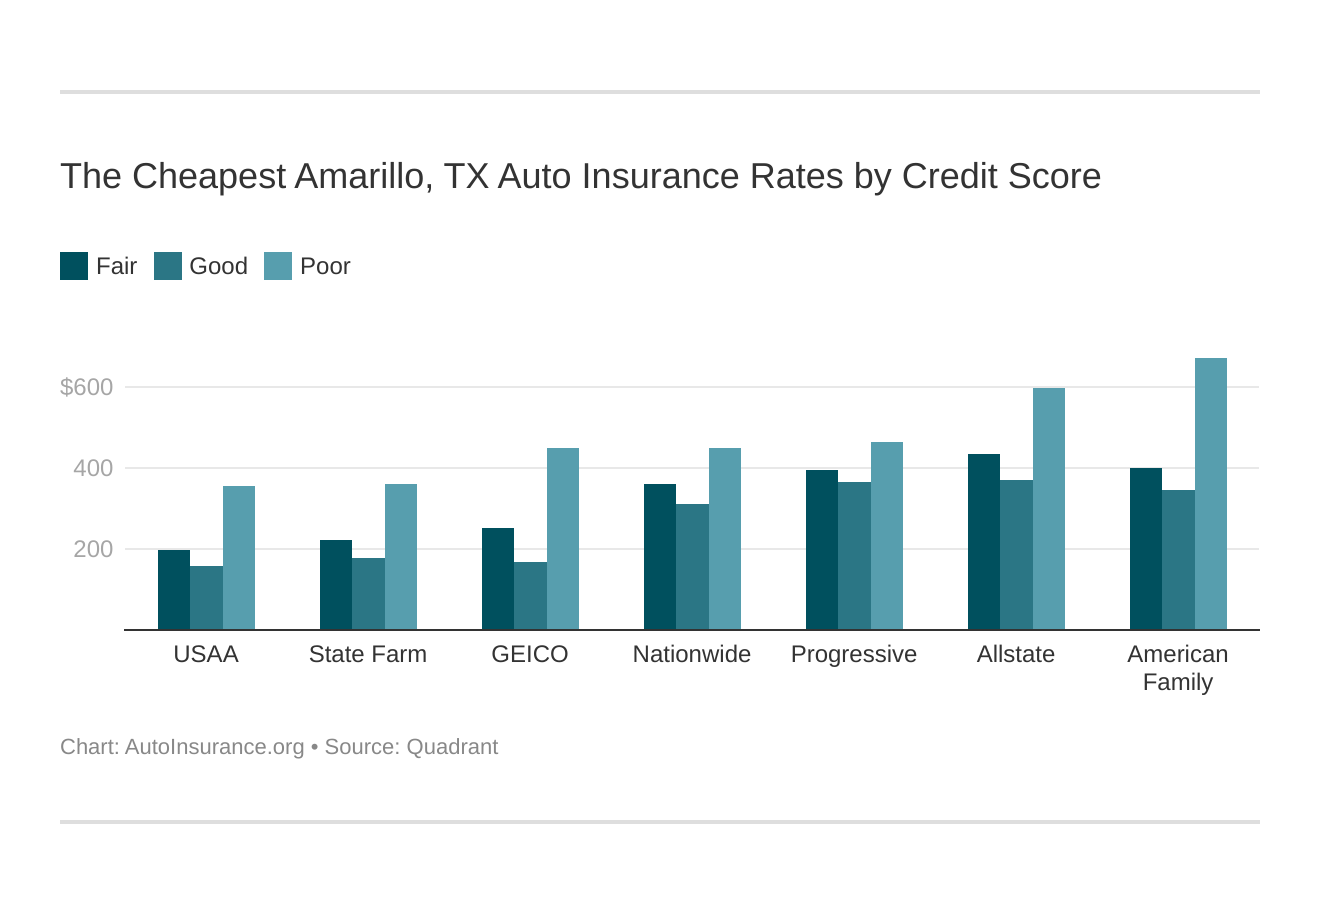 The Cheapest Amarillo, TX Auto Insurance Rates by Credit Score